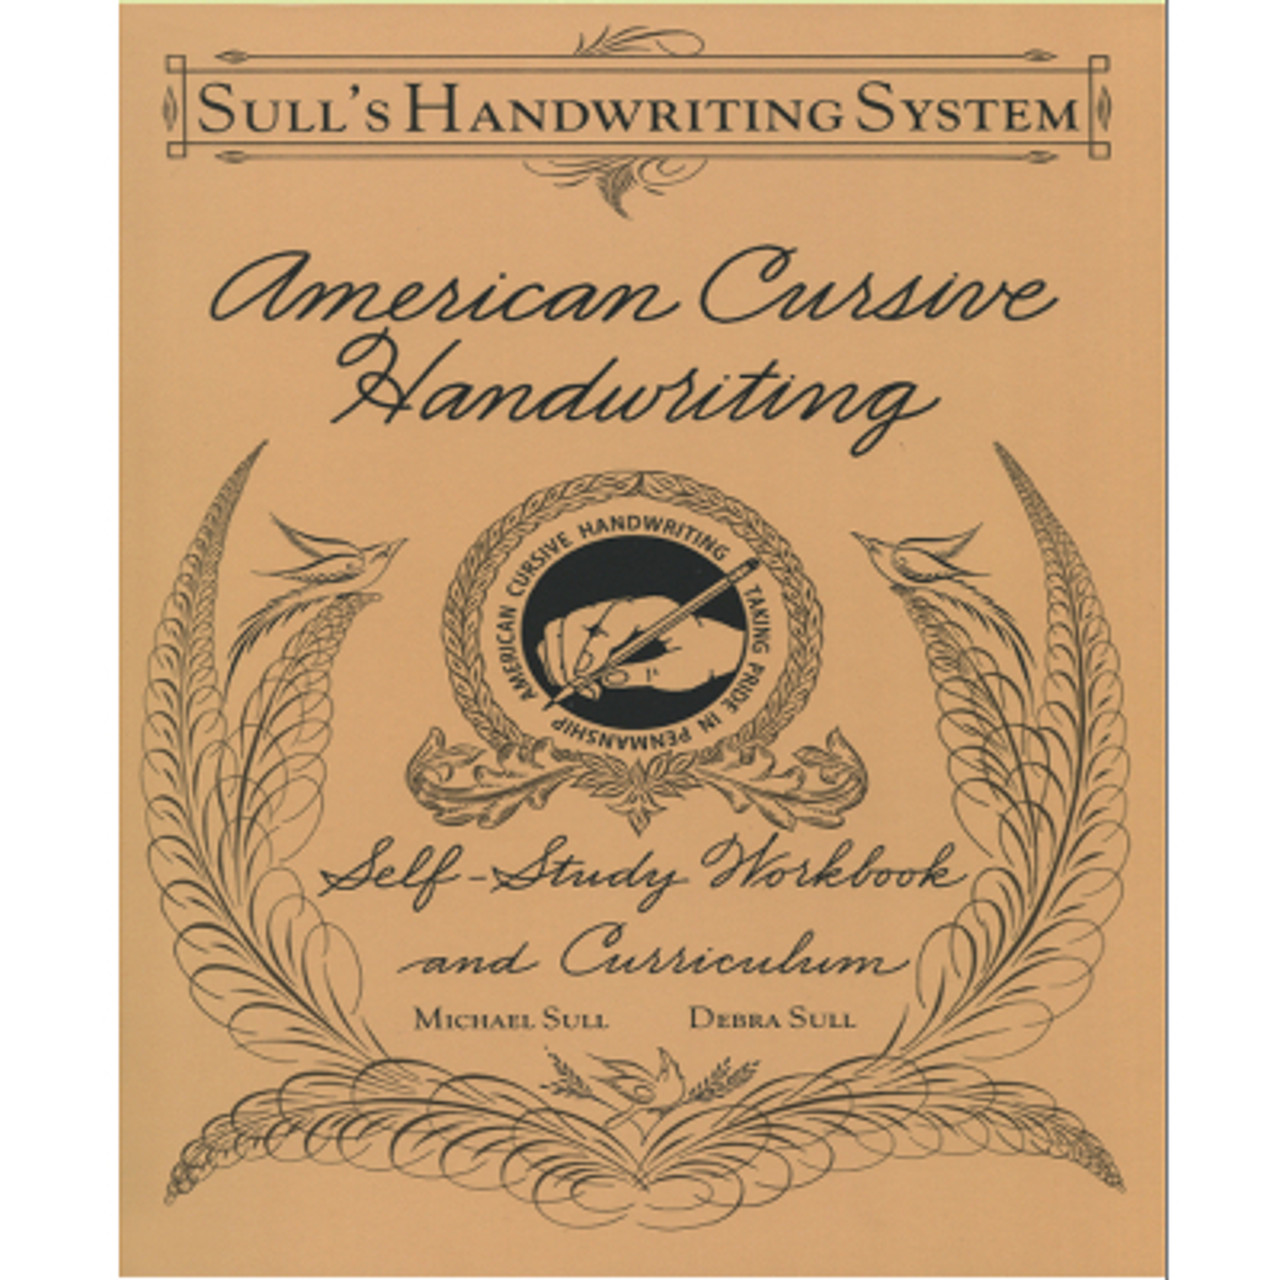 Cursive Handwriting Book, Like New Used, Free shipping in the US